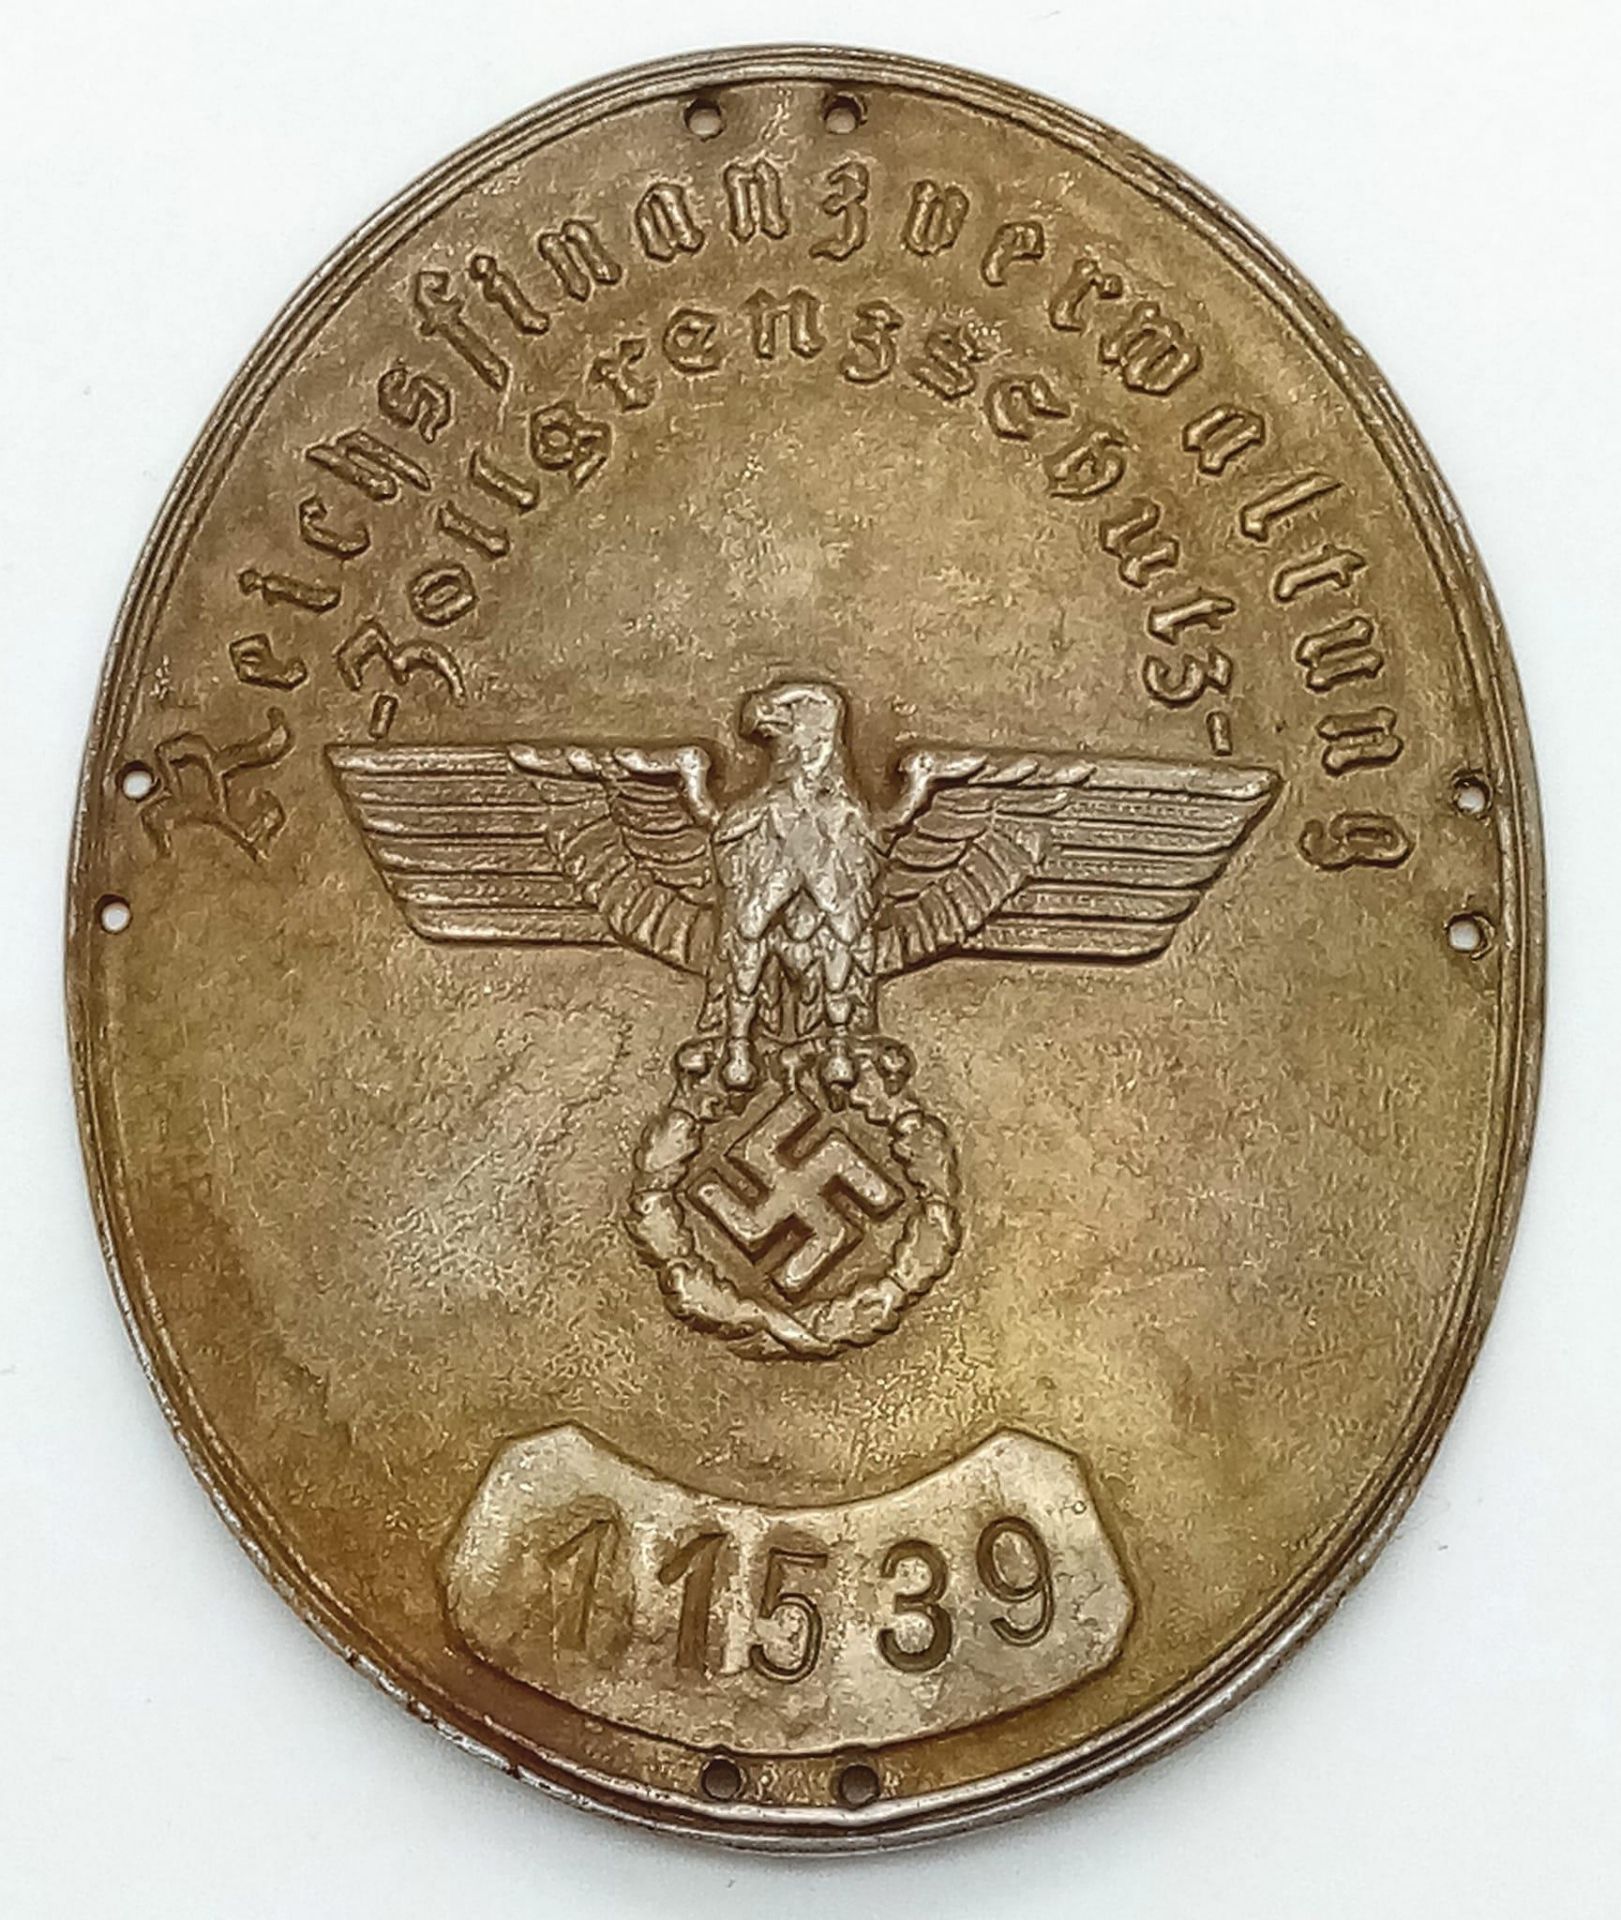 WW2 German Customs Arm Badge. This would have been attached to a green felt armband